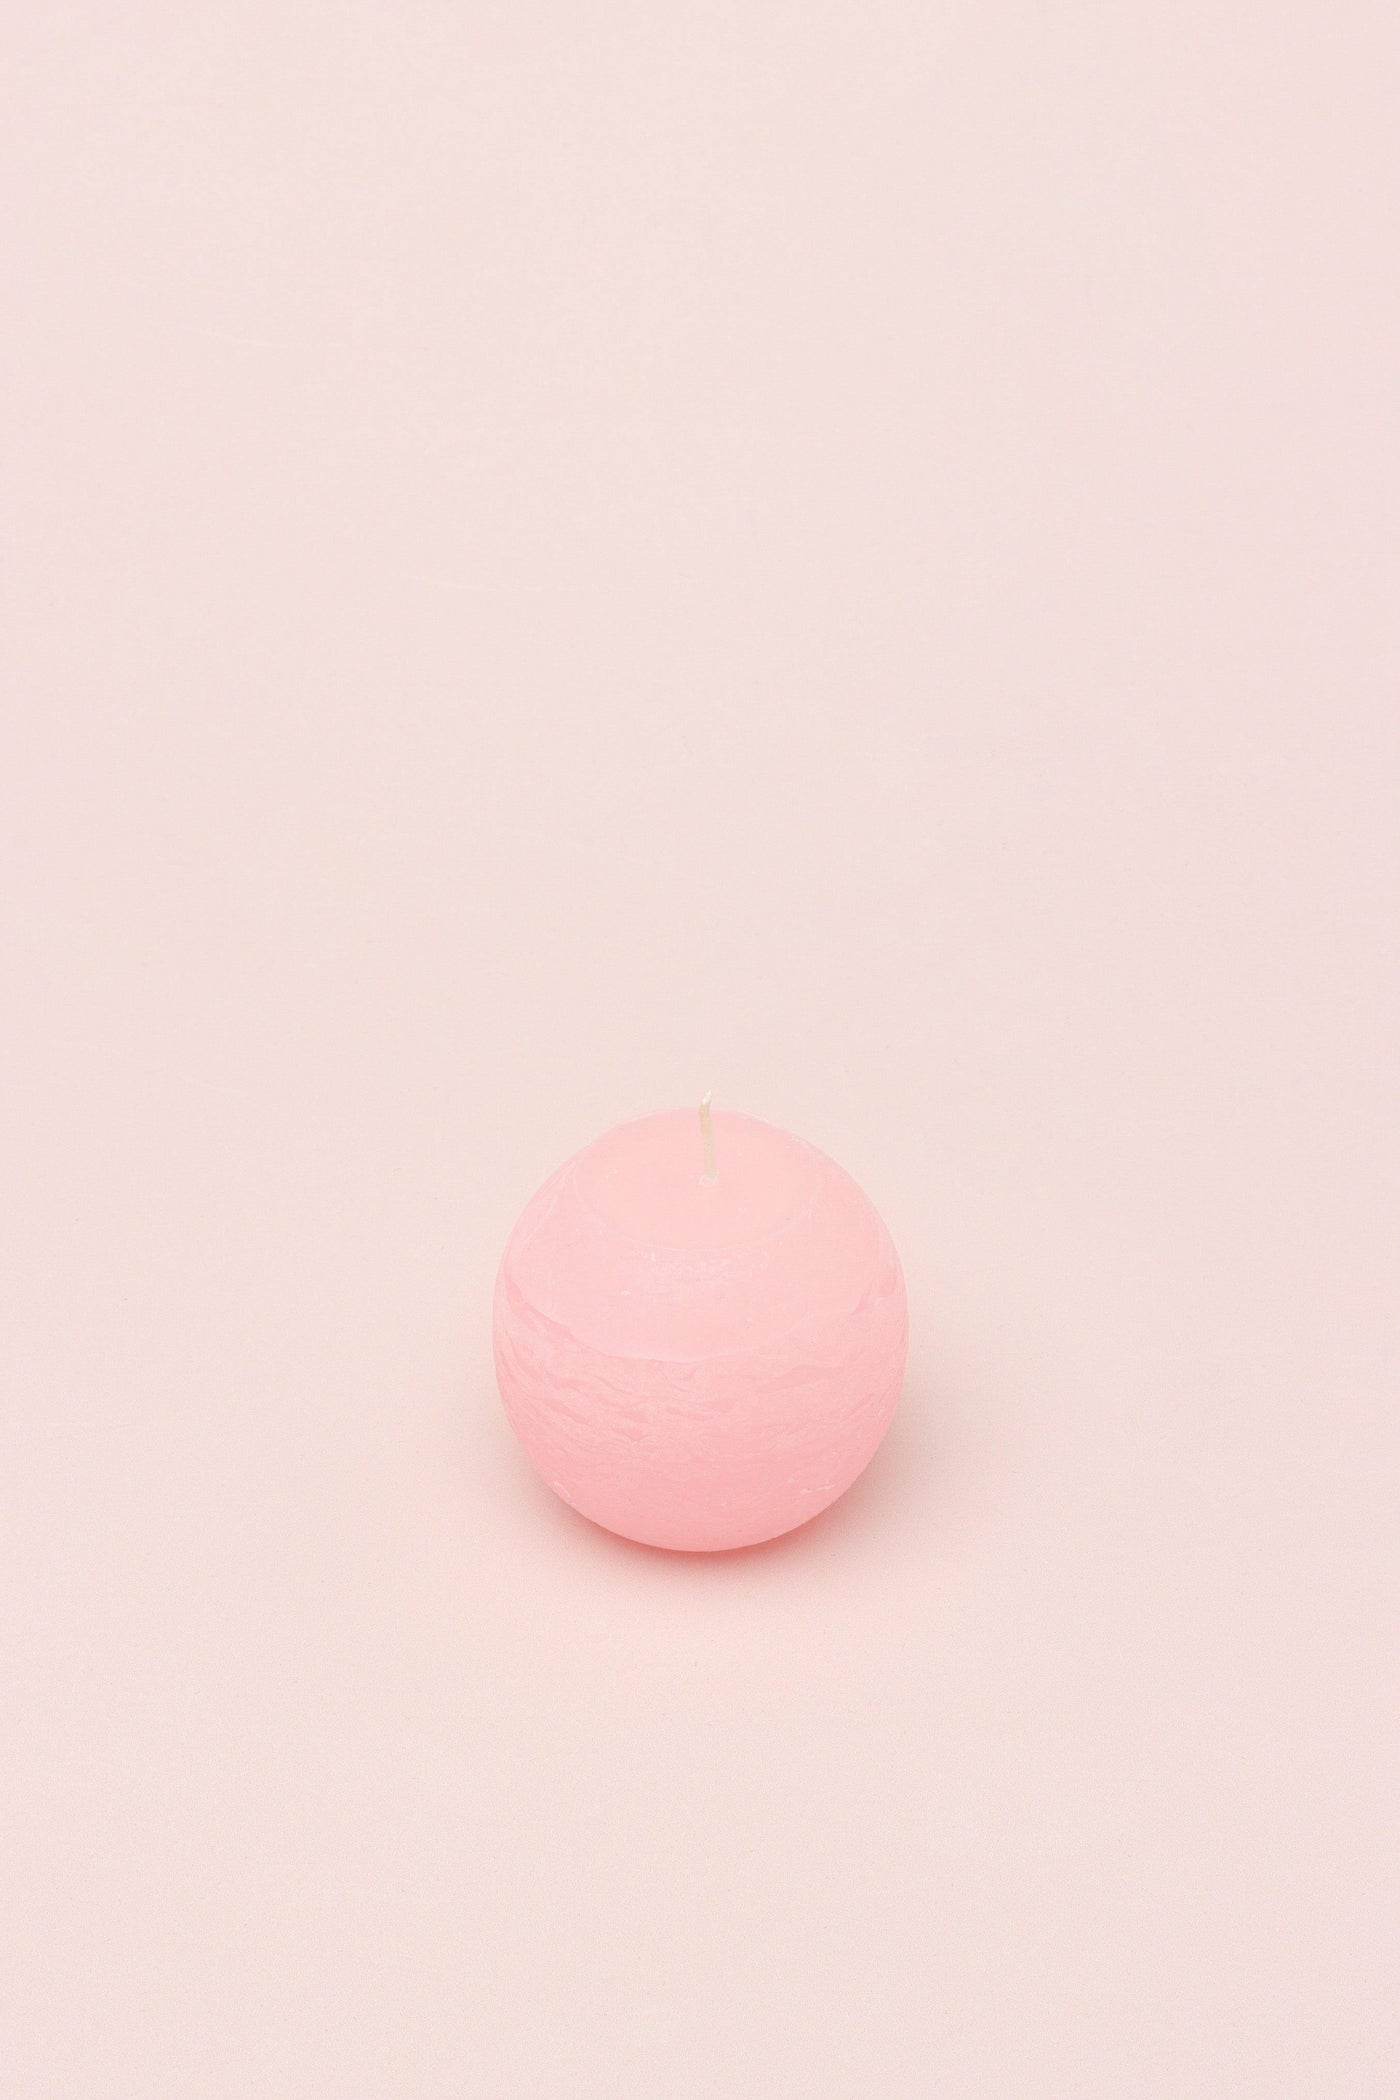 G Decor Candles Pink / Small Georgia Light Pink Ombre Sphere Ball Candles